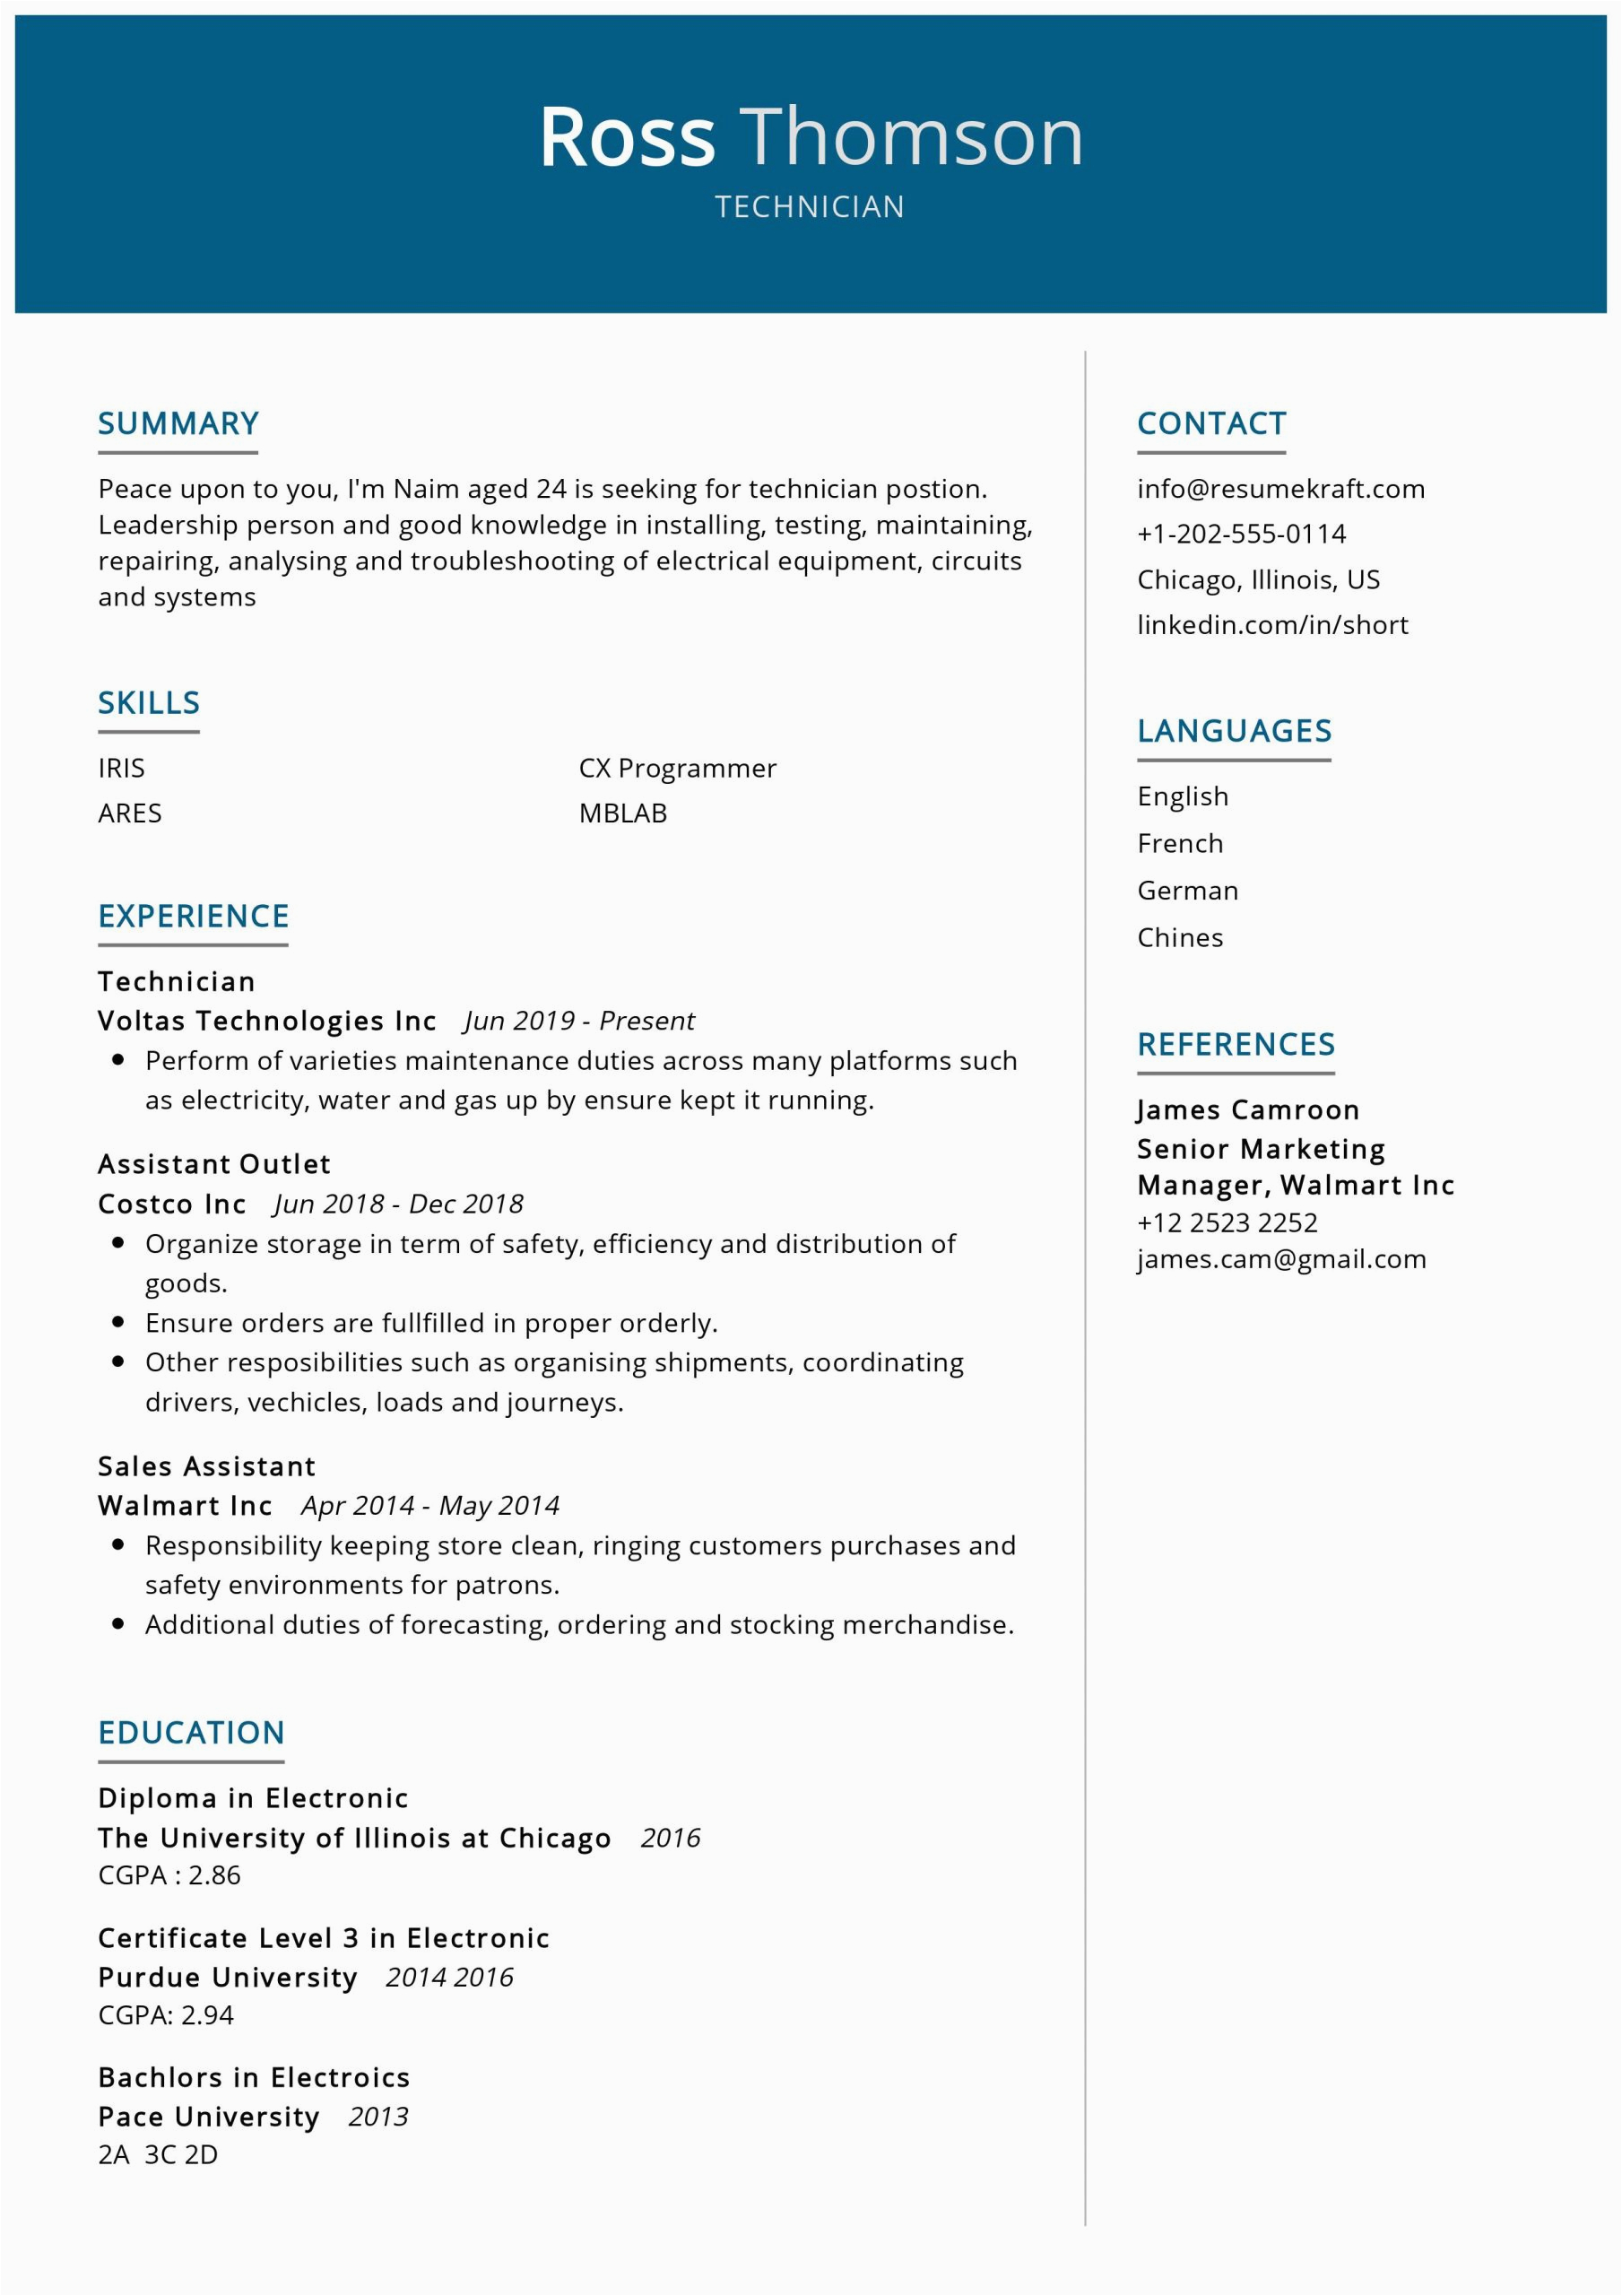 Resume Samples for A Tech Position Technician Resume Sample 2022